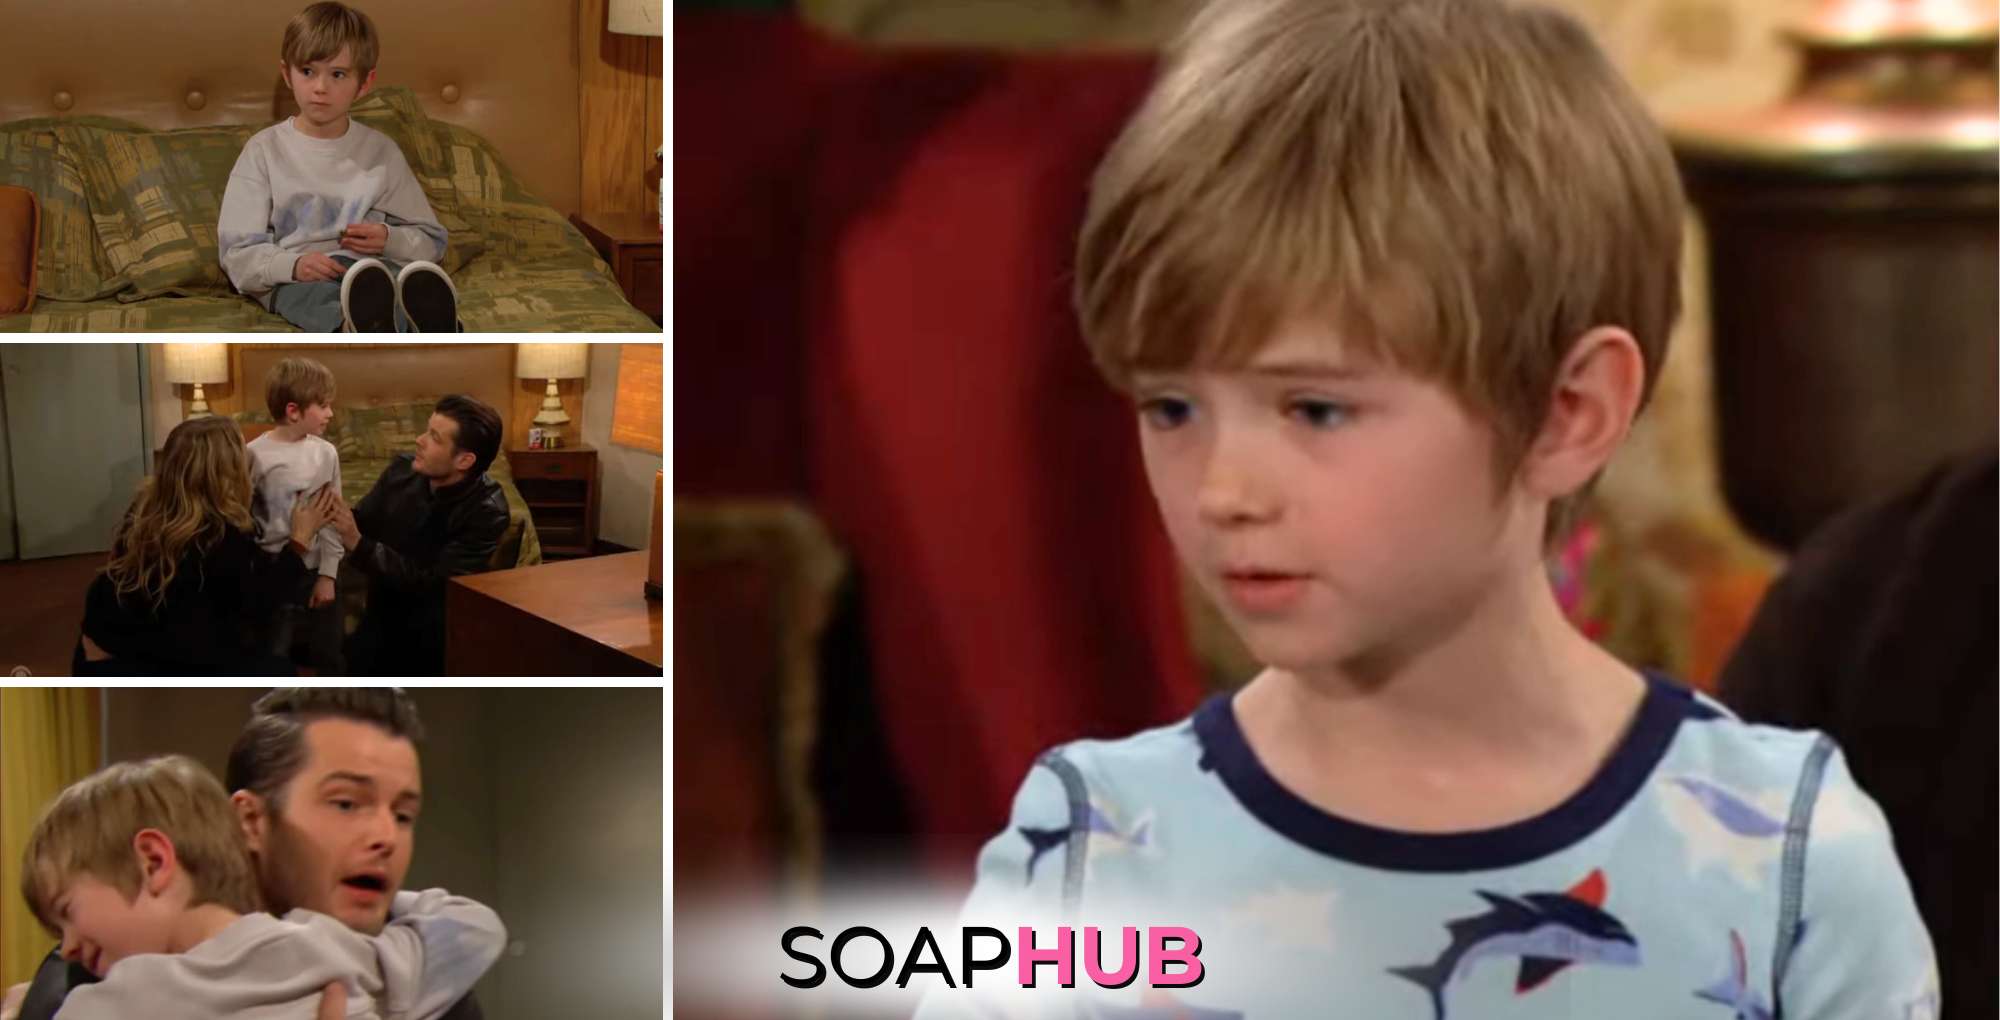 Harrison, Kyle, and Summer on The Young and the Restless with the Soap Hub logo across the bottom.